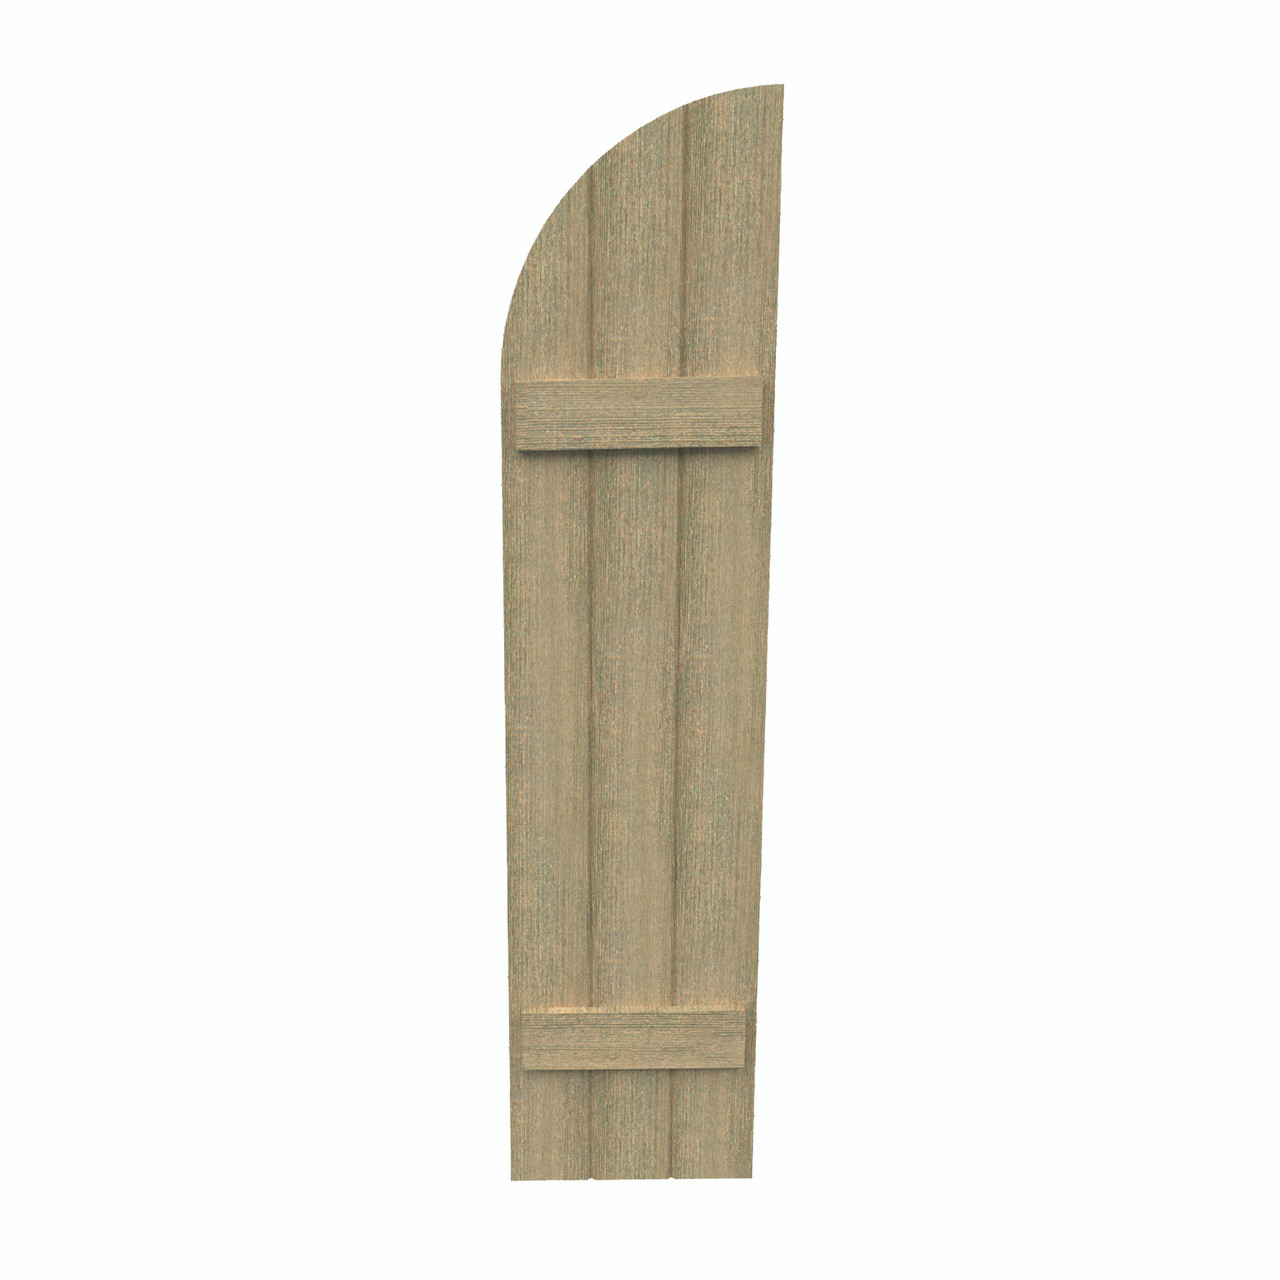 14 inch by 111 inch Quarter Round Shutter with 3-Boards